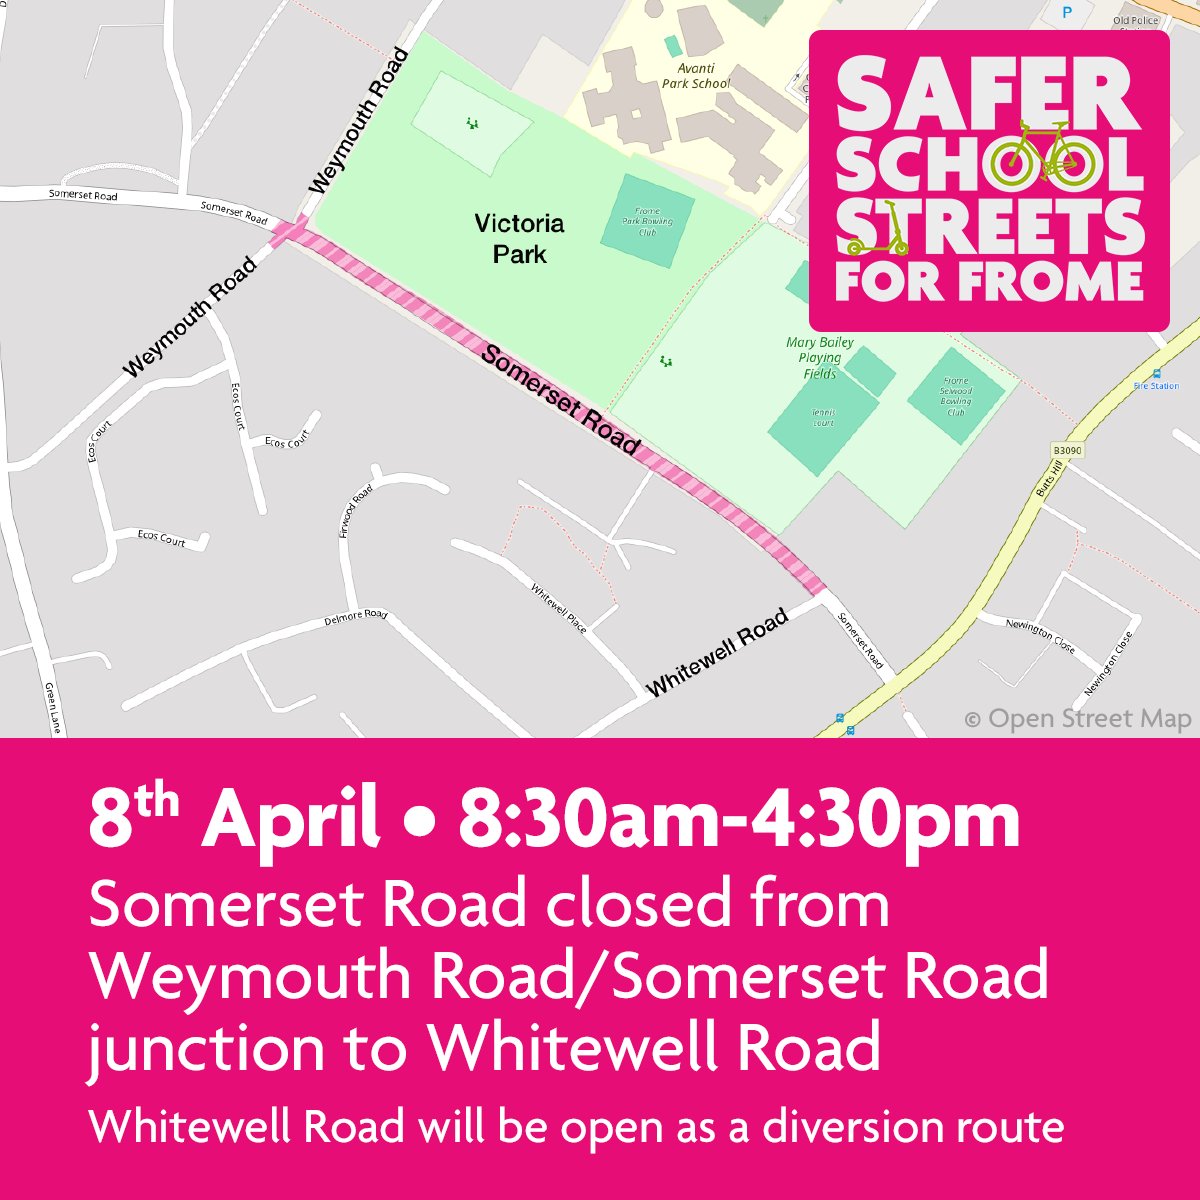 🚧 The work schedule for Frome's Safer School Streets continues, with part of Somerset Road closed on 8th April, from 8:30am - 4:30pm, for additional resurfacing works. ℹ Please see further details of closures on our website ➡ bit.ly/safer-school-s…